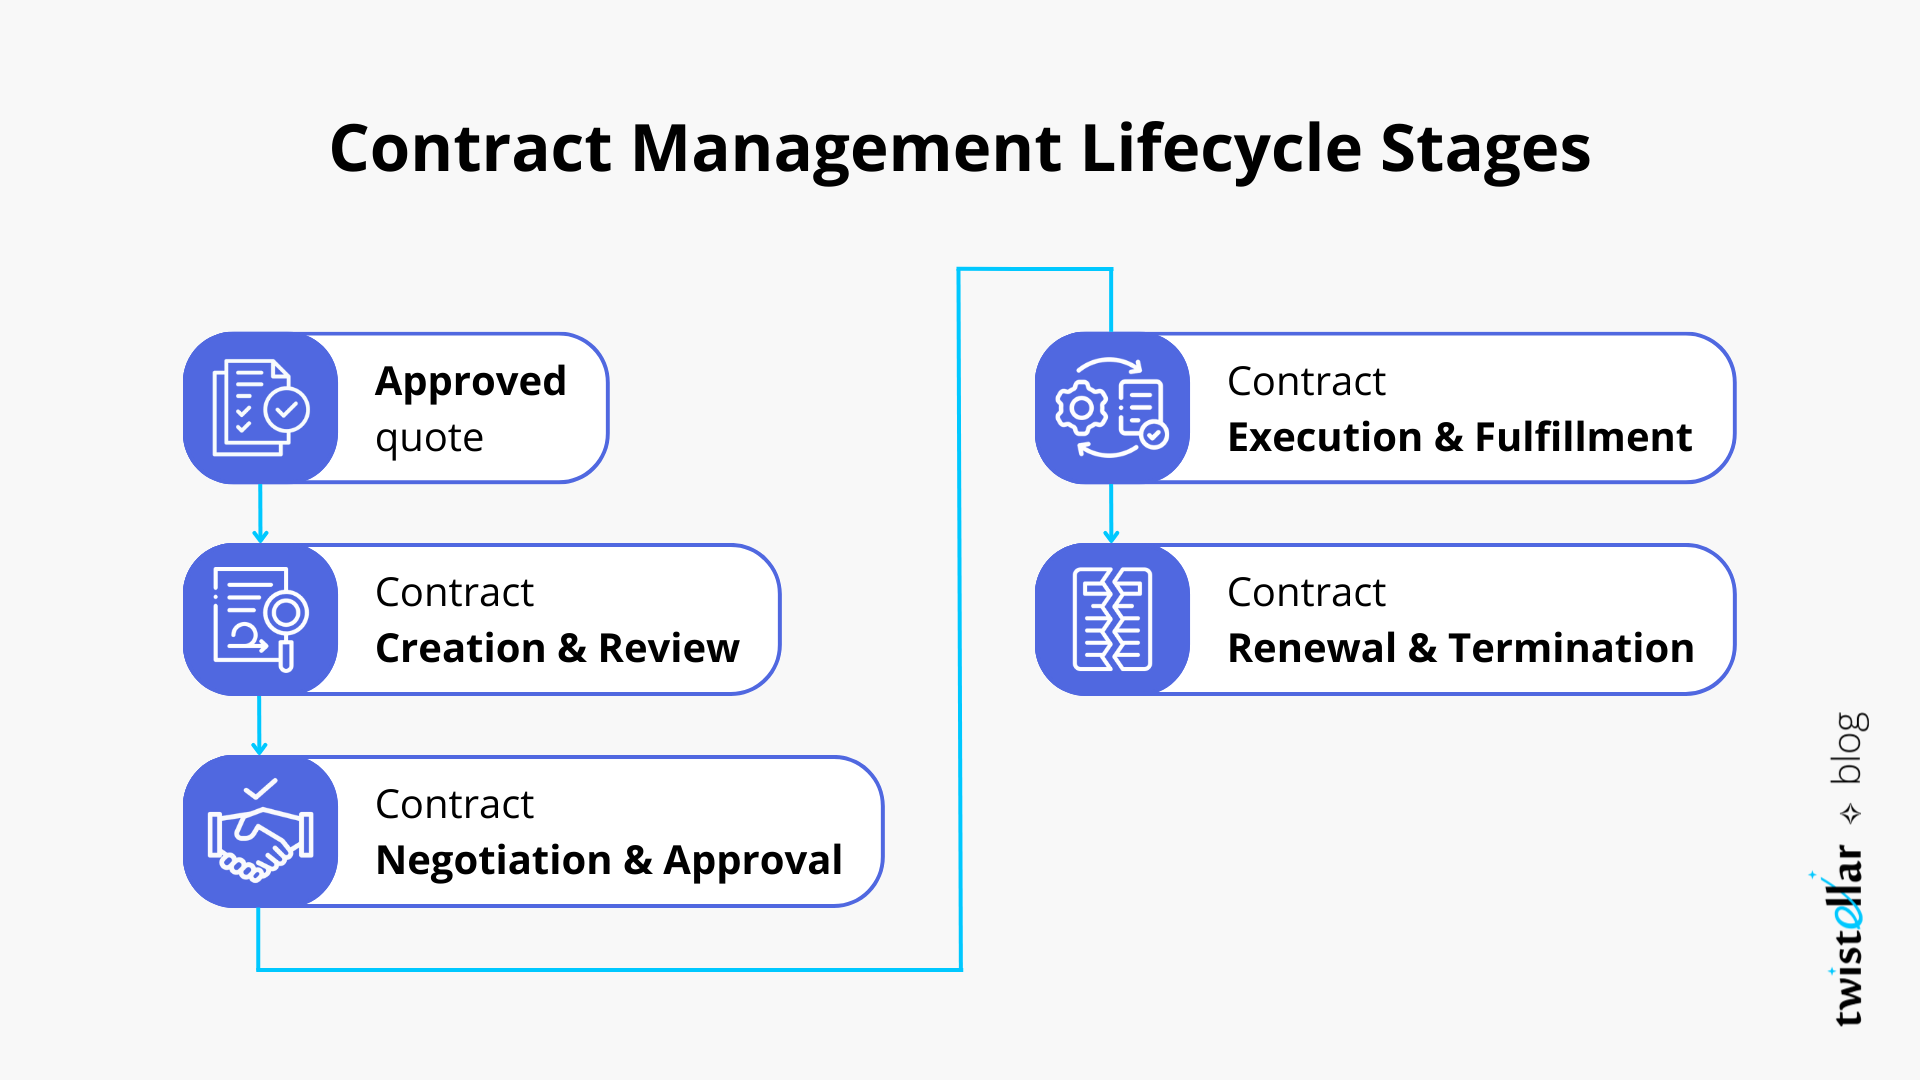 Contract Management Lifecycle Stages